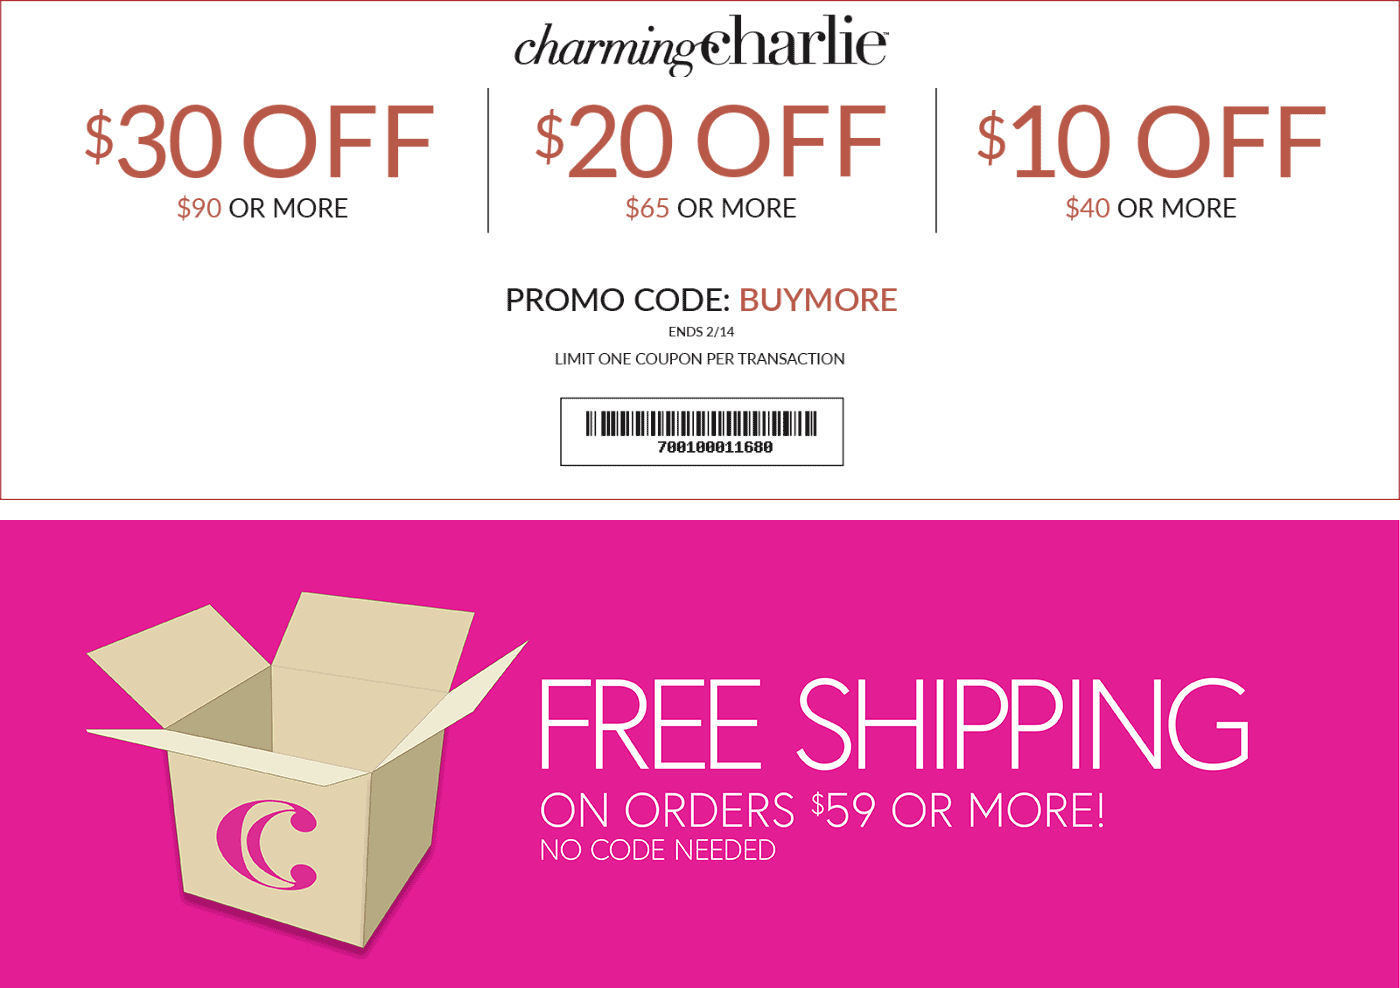 Charming Charlie coupons & promo code for [May 2022]